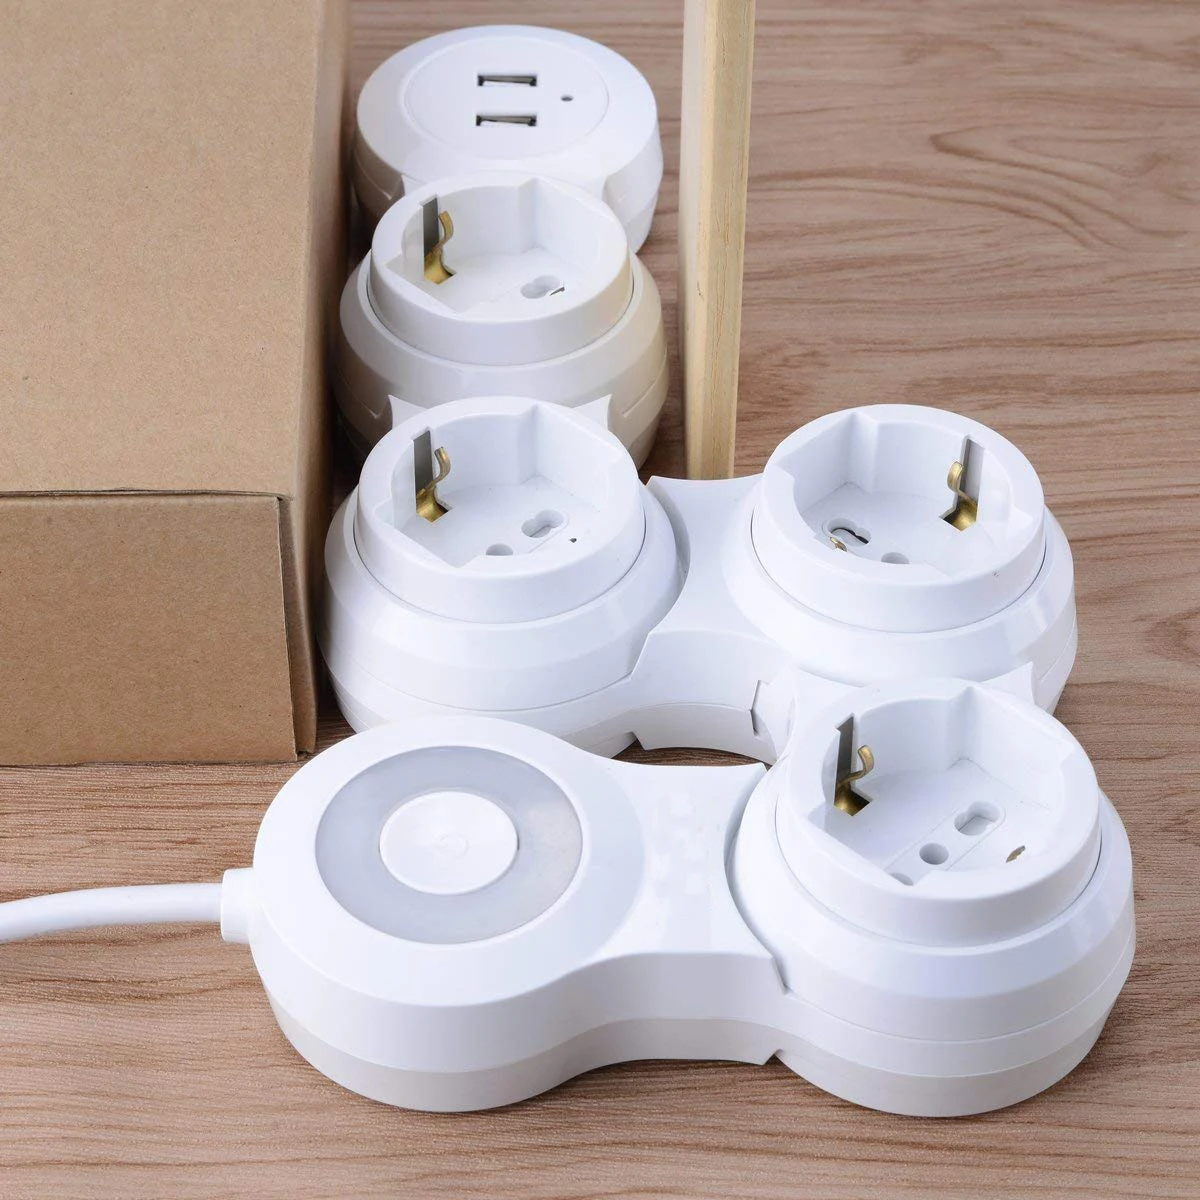 Power Strip Multiple 4 way EU Outlets Electric Switch Plug Socket with USB Port 2500W 10A 1.8m Extension Cord Travel Home Office